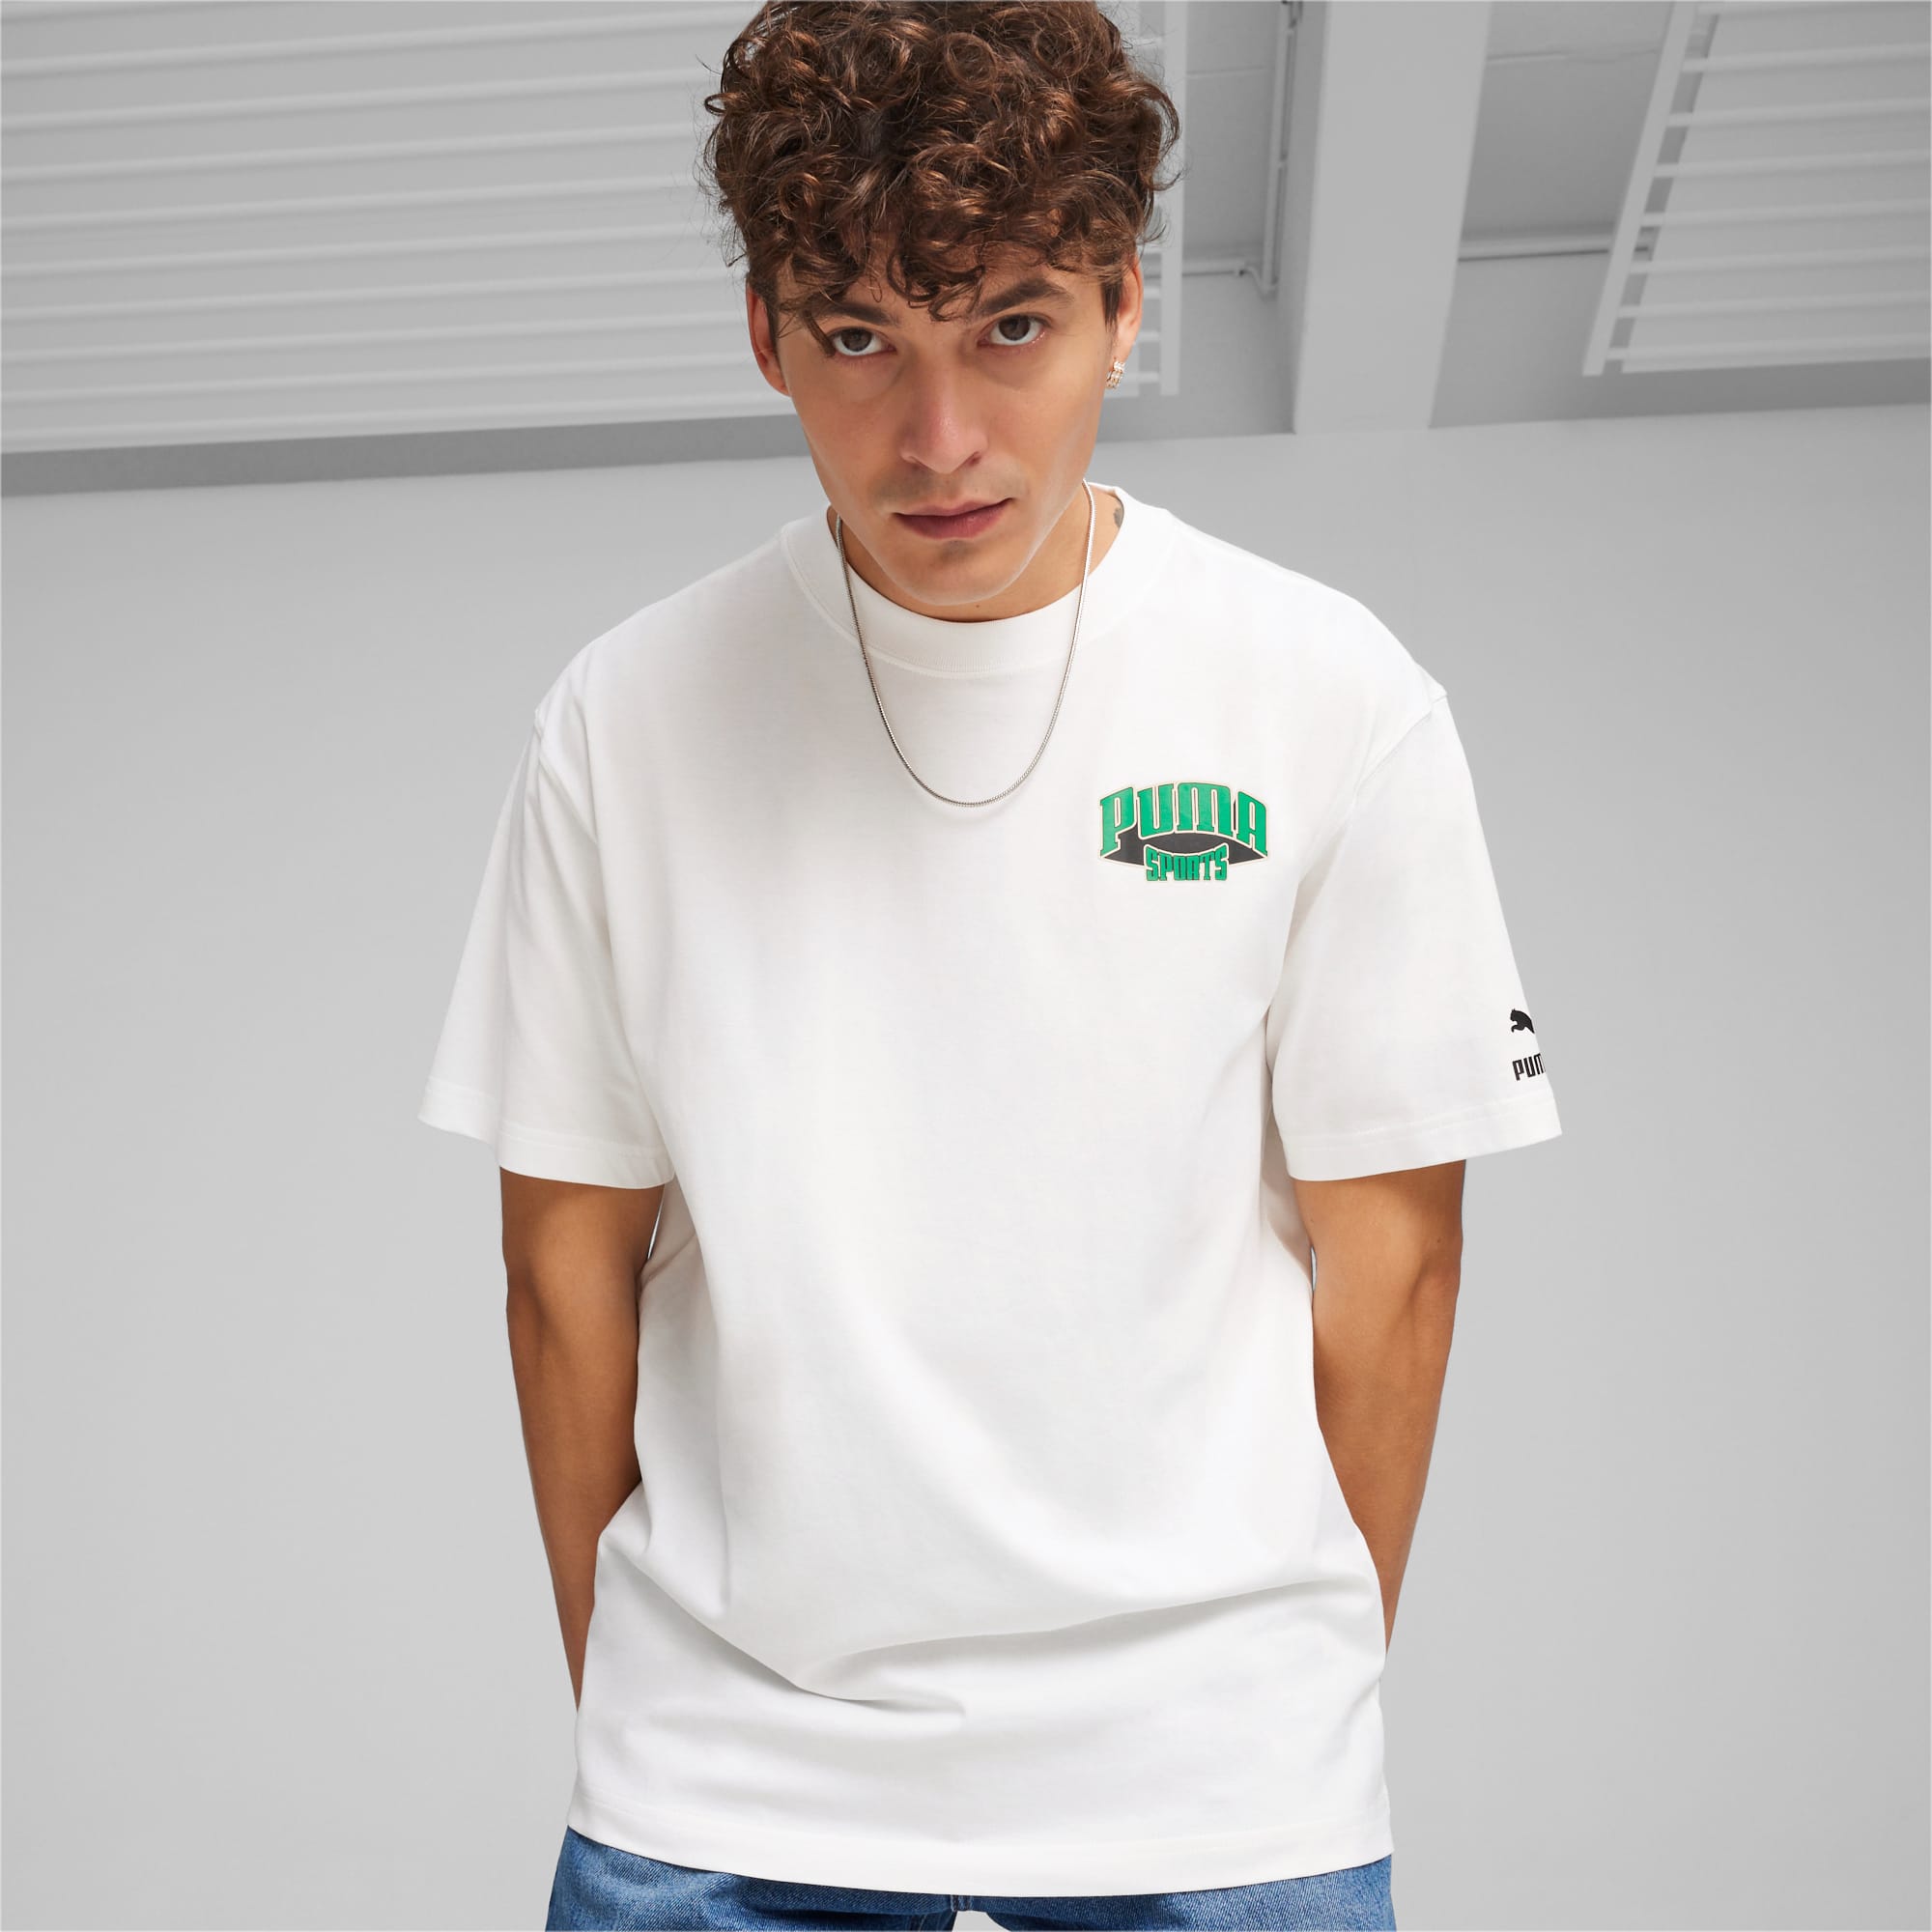 Men's T-Shirts  Off-White™ Official Website